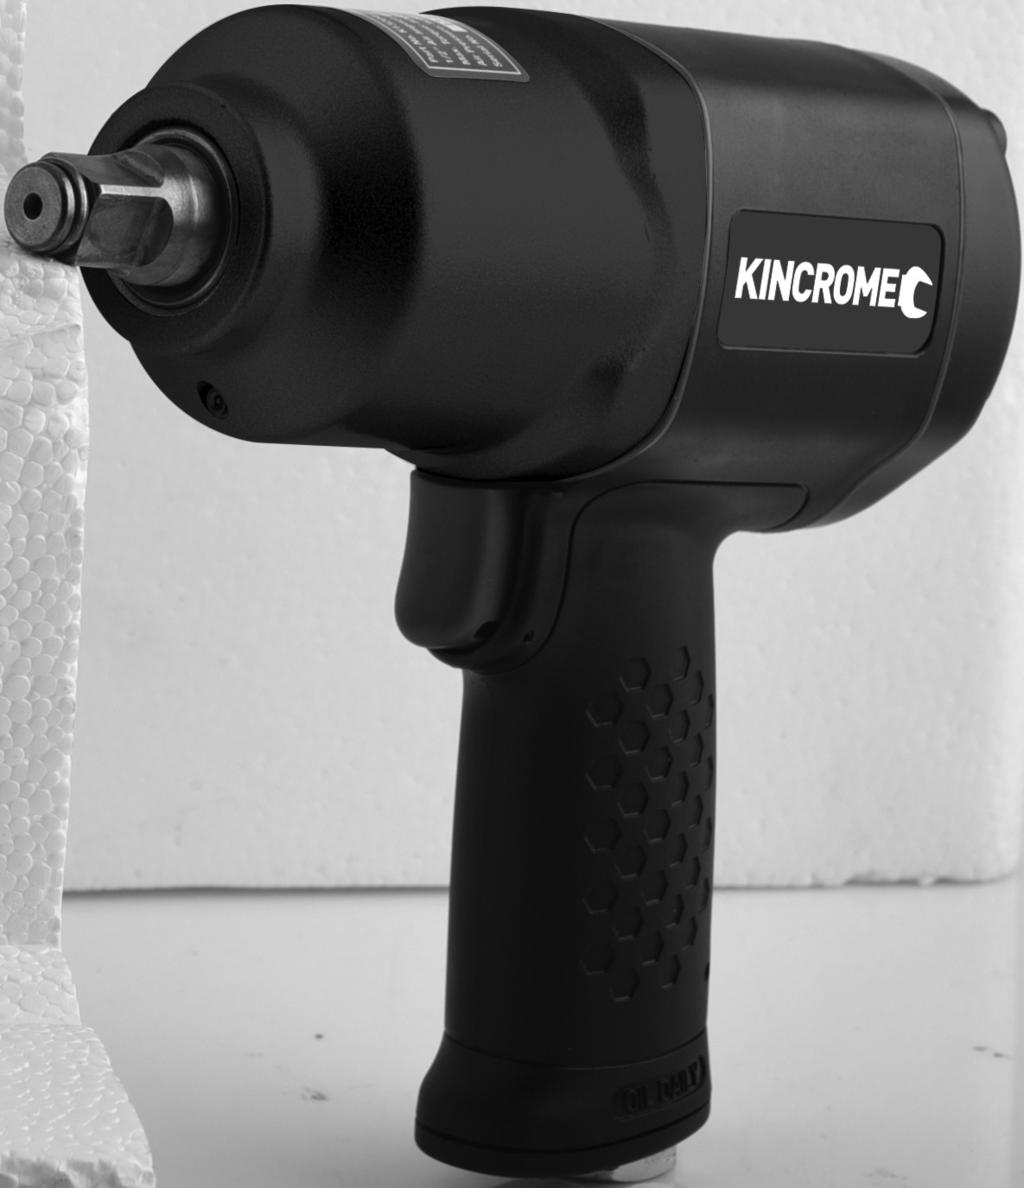 1/2 DRIVE AIR IMPACT WRENCH 2 YEAR WARRANTY 1110NM MAX